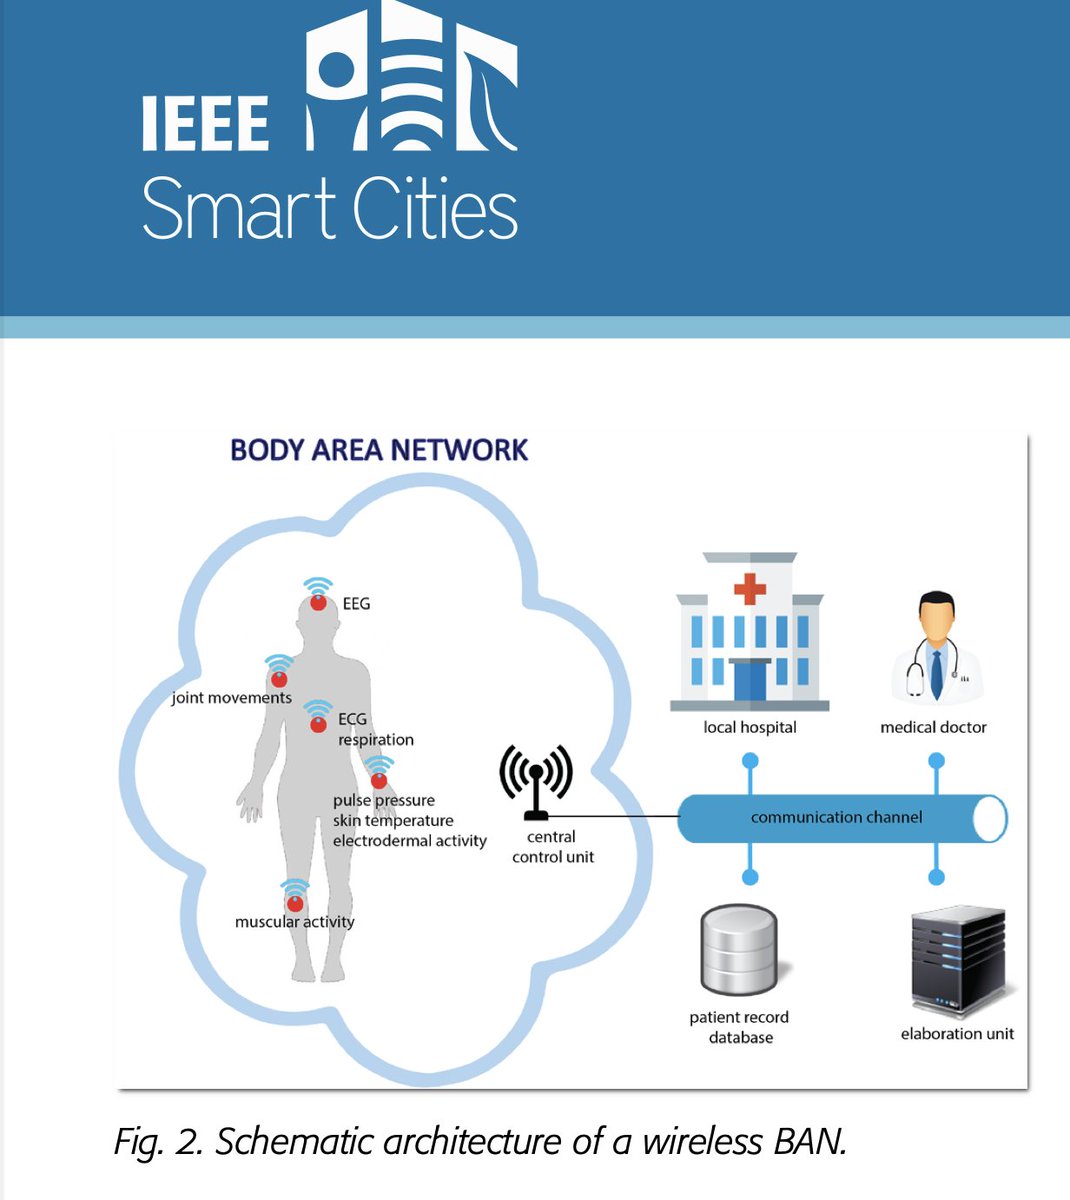 WIRELESS BODY AREA NETWORKS: 
A NEW PARADIGM OF PERSONAL SMART HEALTH

#MedicalBAN

#MedicalBodyAreaNetwork 

#WirelessMedicalNanoSensorNetwork

#InternetofBioNanoThings

#InternetofBodies

#BioCyberNanoInterface

#smartHealth

#IoMT

smartcities.ieee.org/images/files/p…